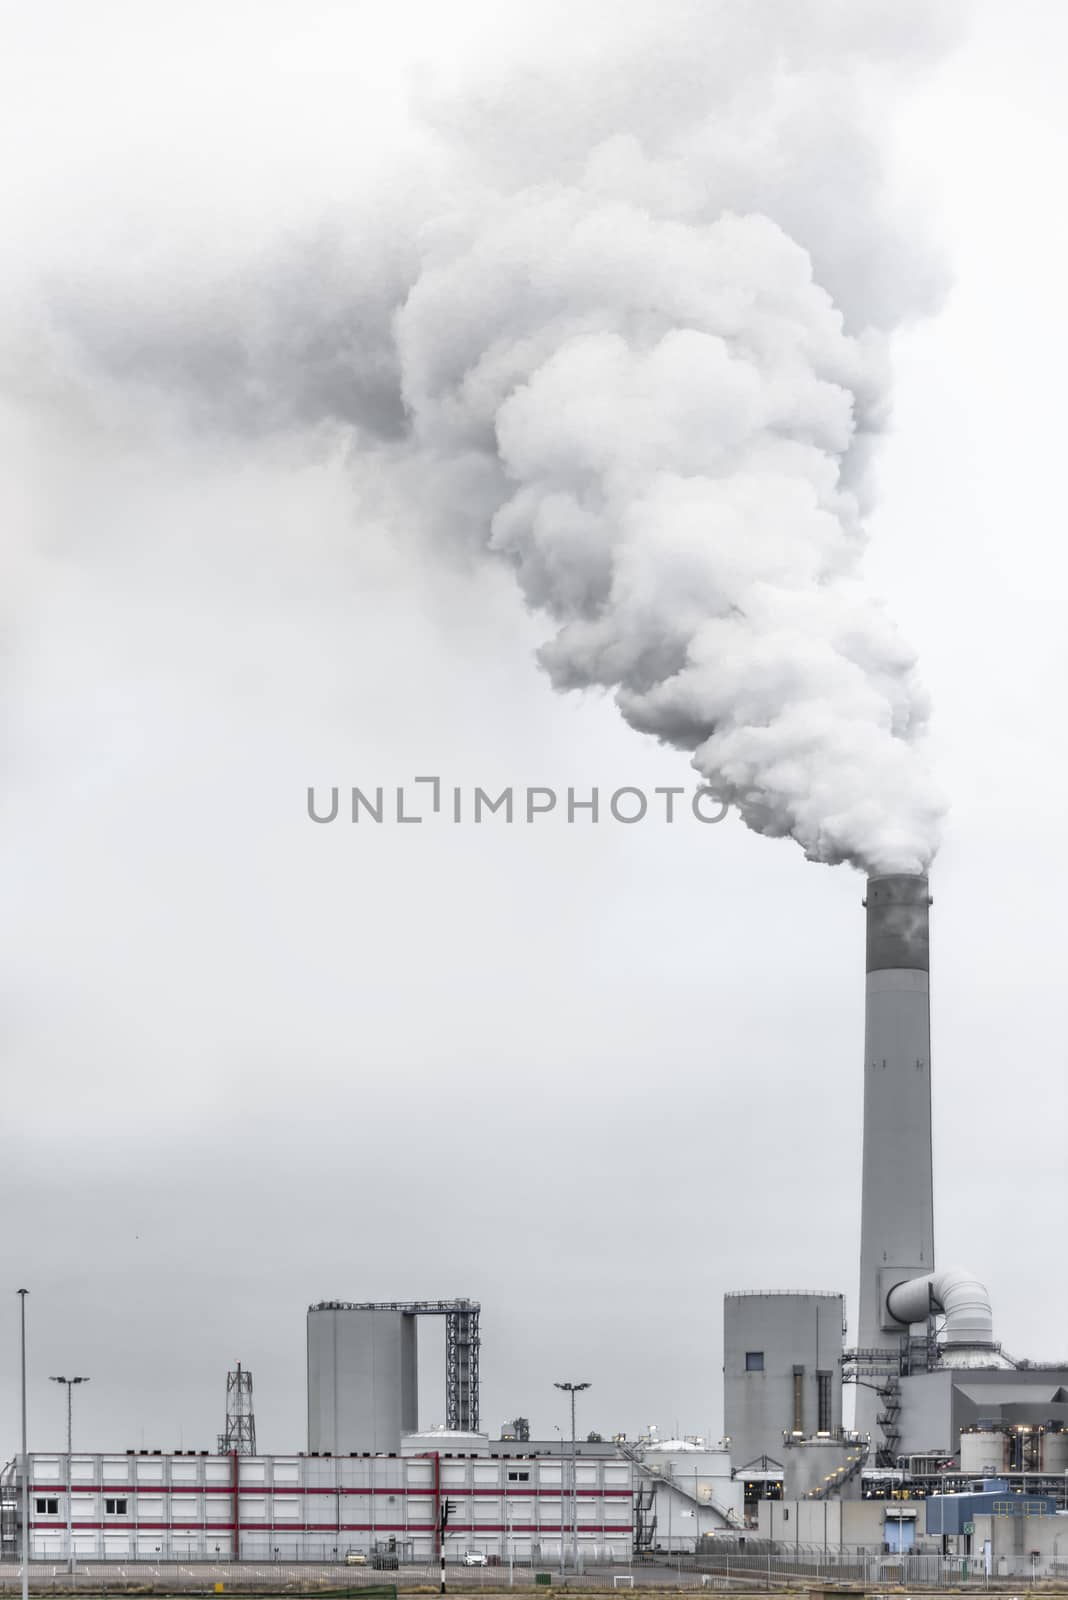 Tall chimney exhausting or pulling a huge quantity of smoke, mist or pollution, Rotterdam, Netherlands